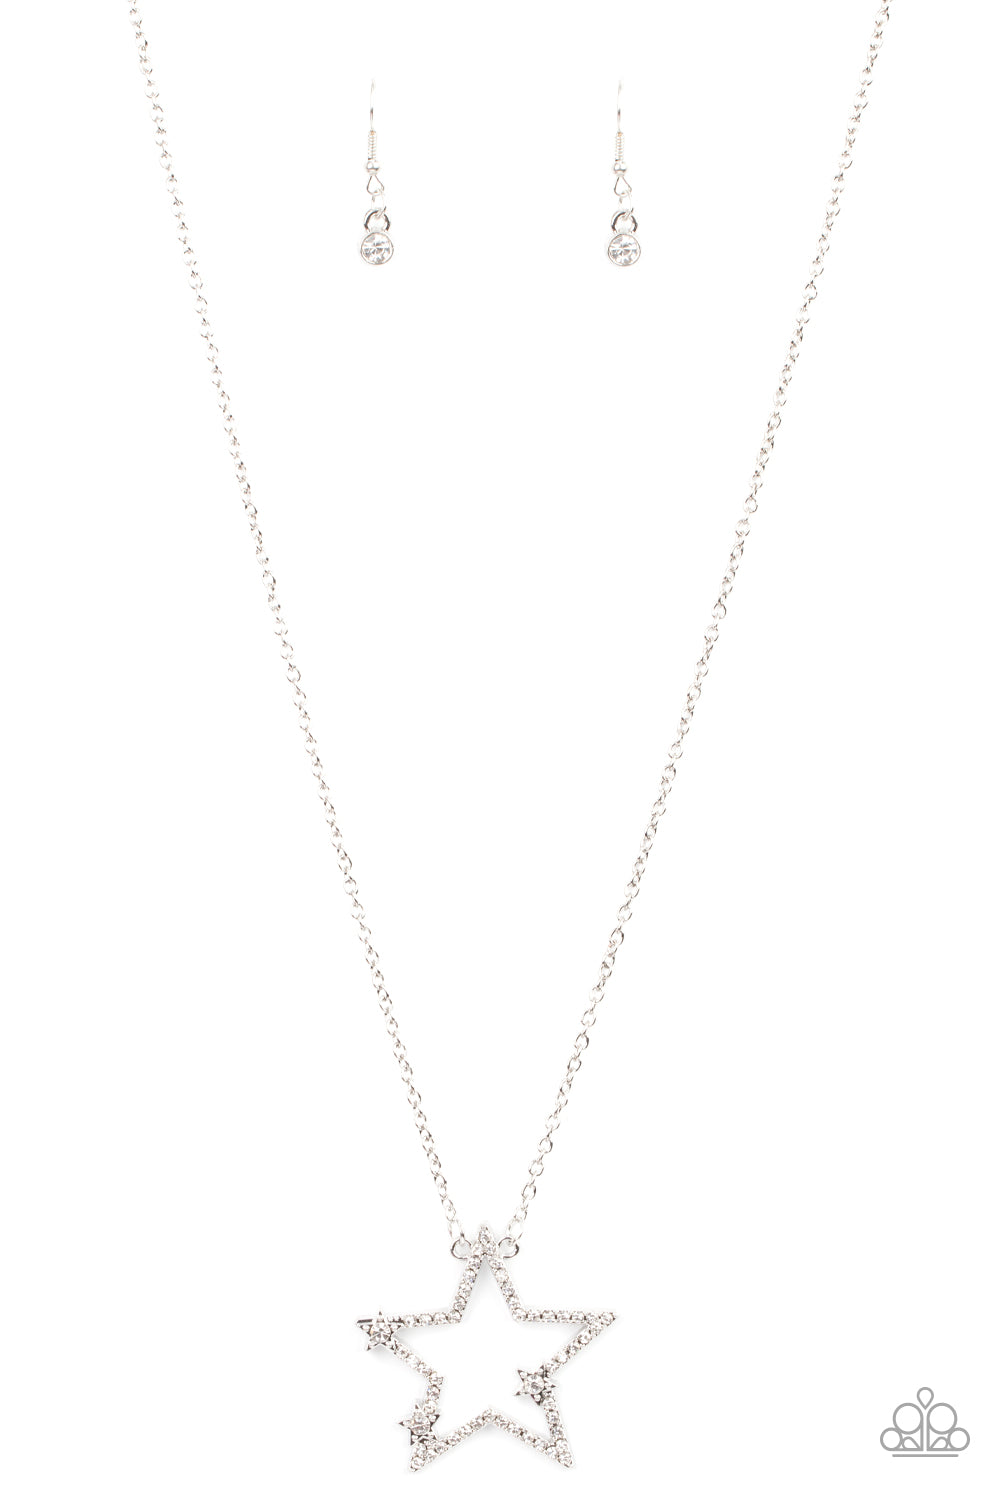 I Pledge Allegiance to the Sparkle Paparazzi Accessories Necklace with Earrings -White